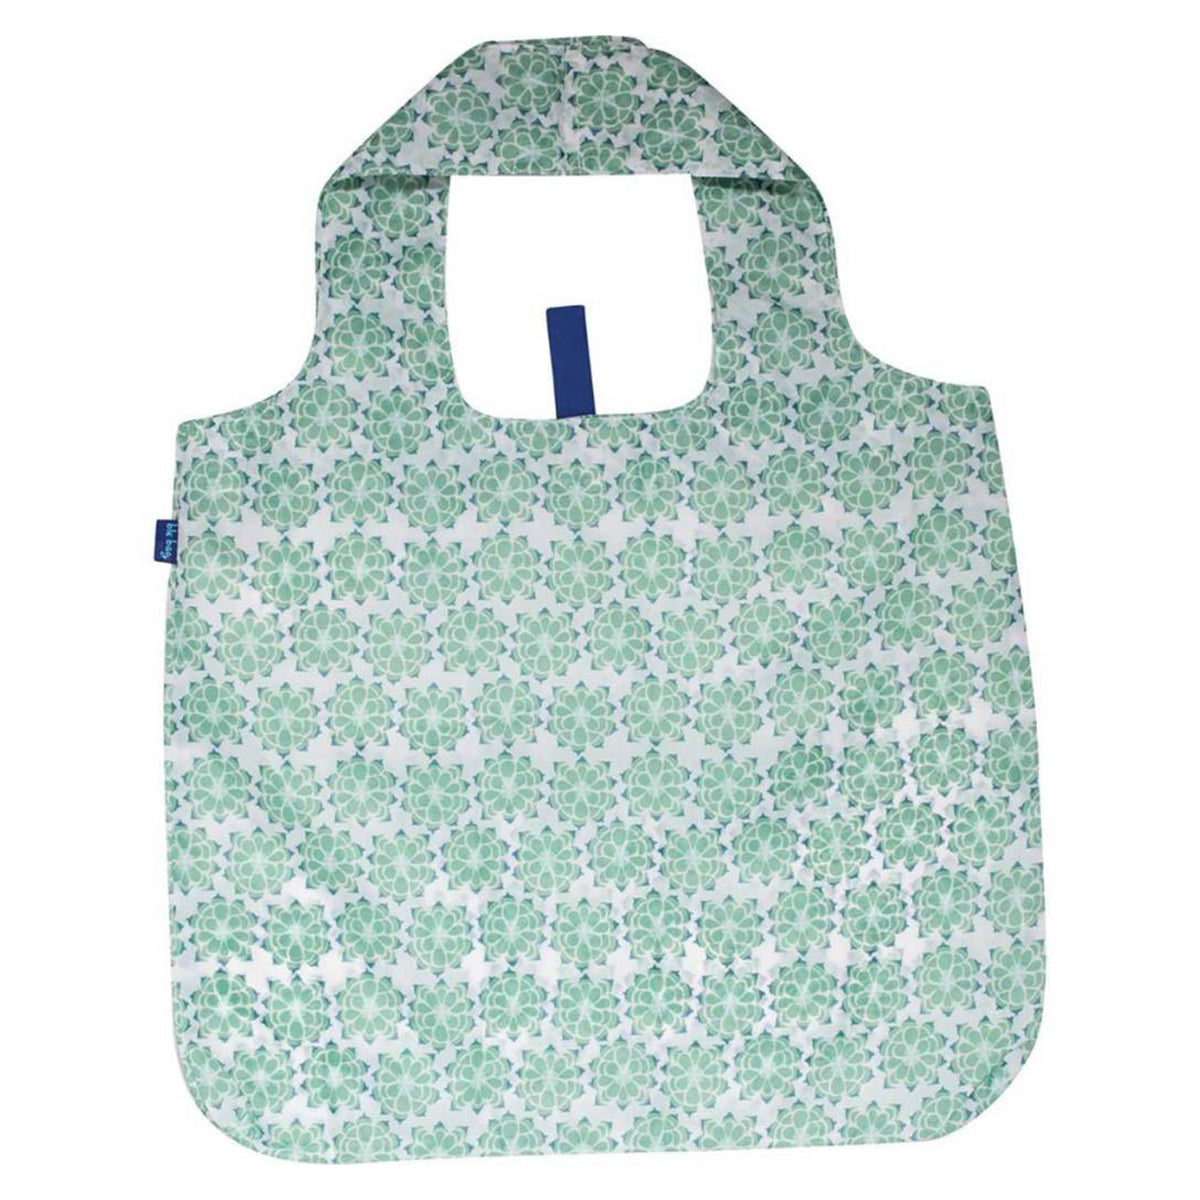 Rockflowerpaper reusable shopper with a green floral pattern on a white background.